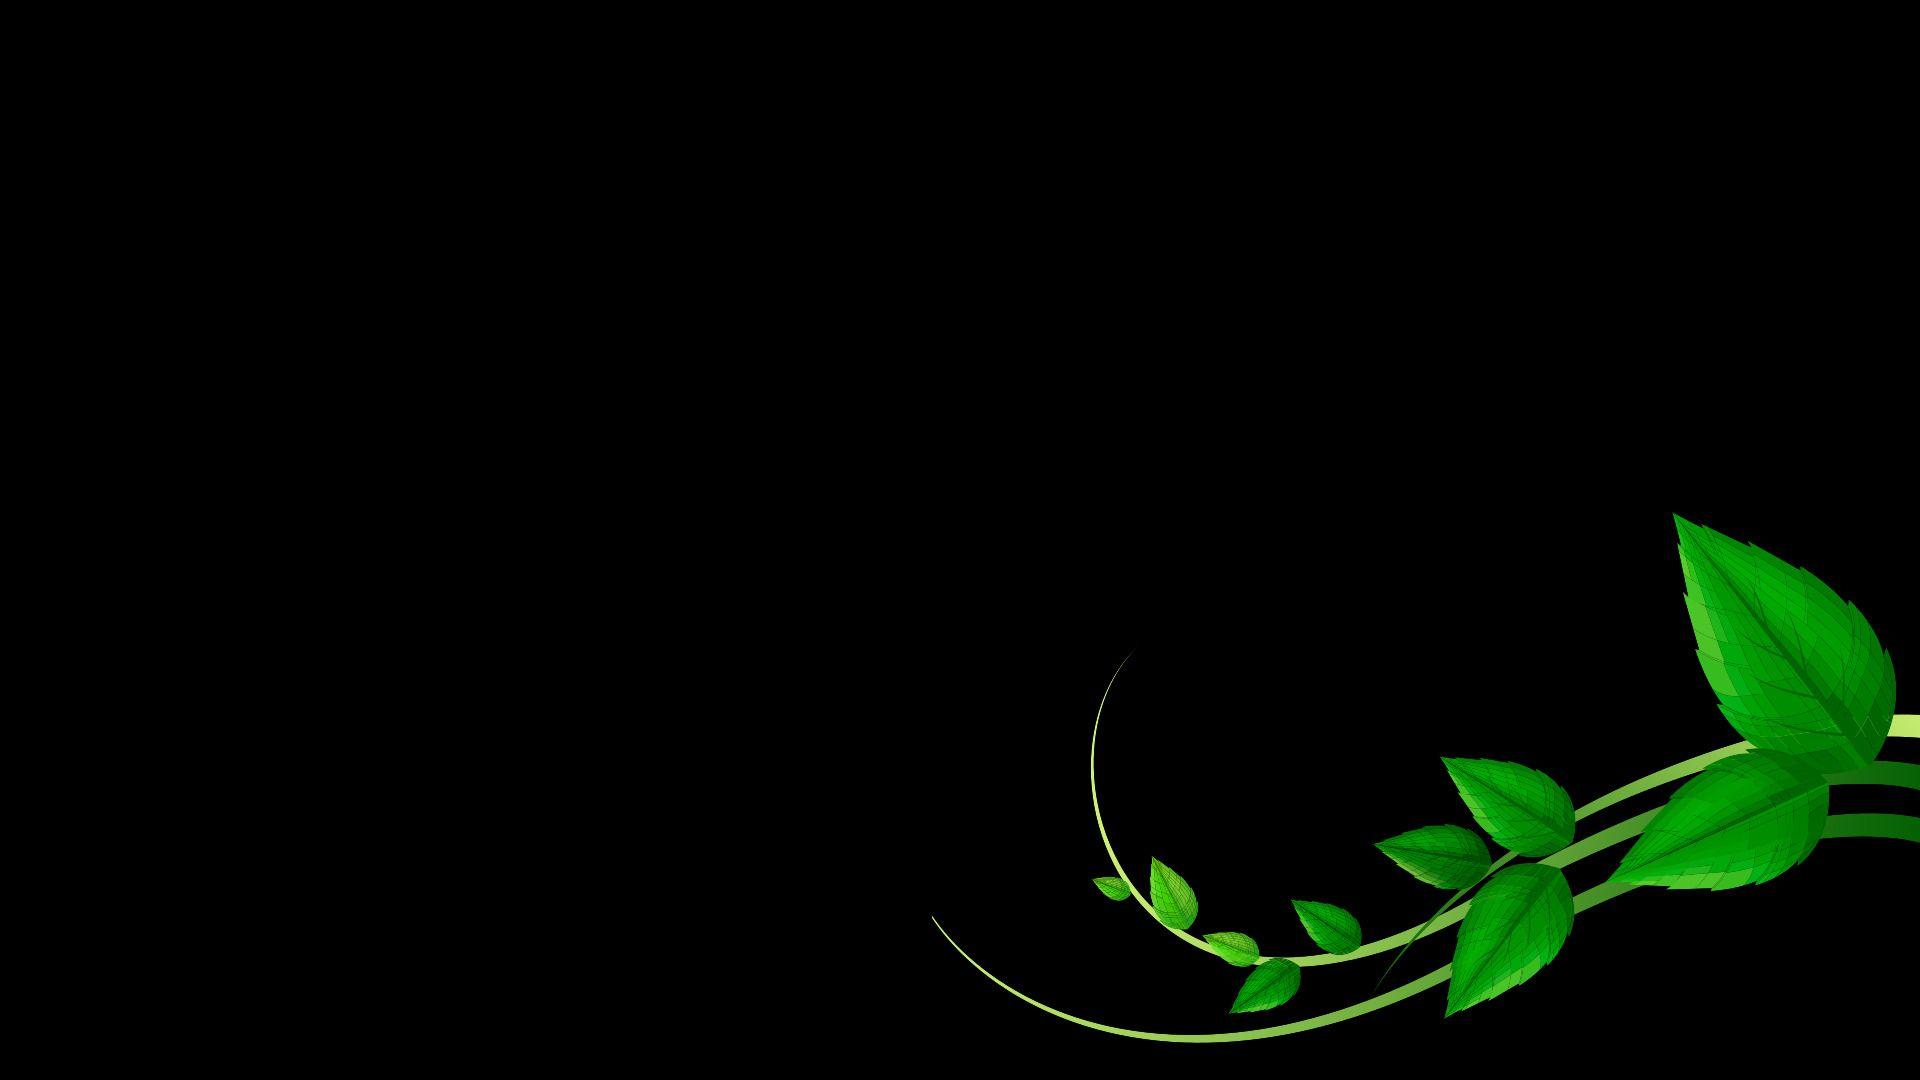 Green Minimalistic Wallpapers - Top Free Green Minimalistic Backgrounds